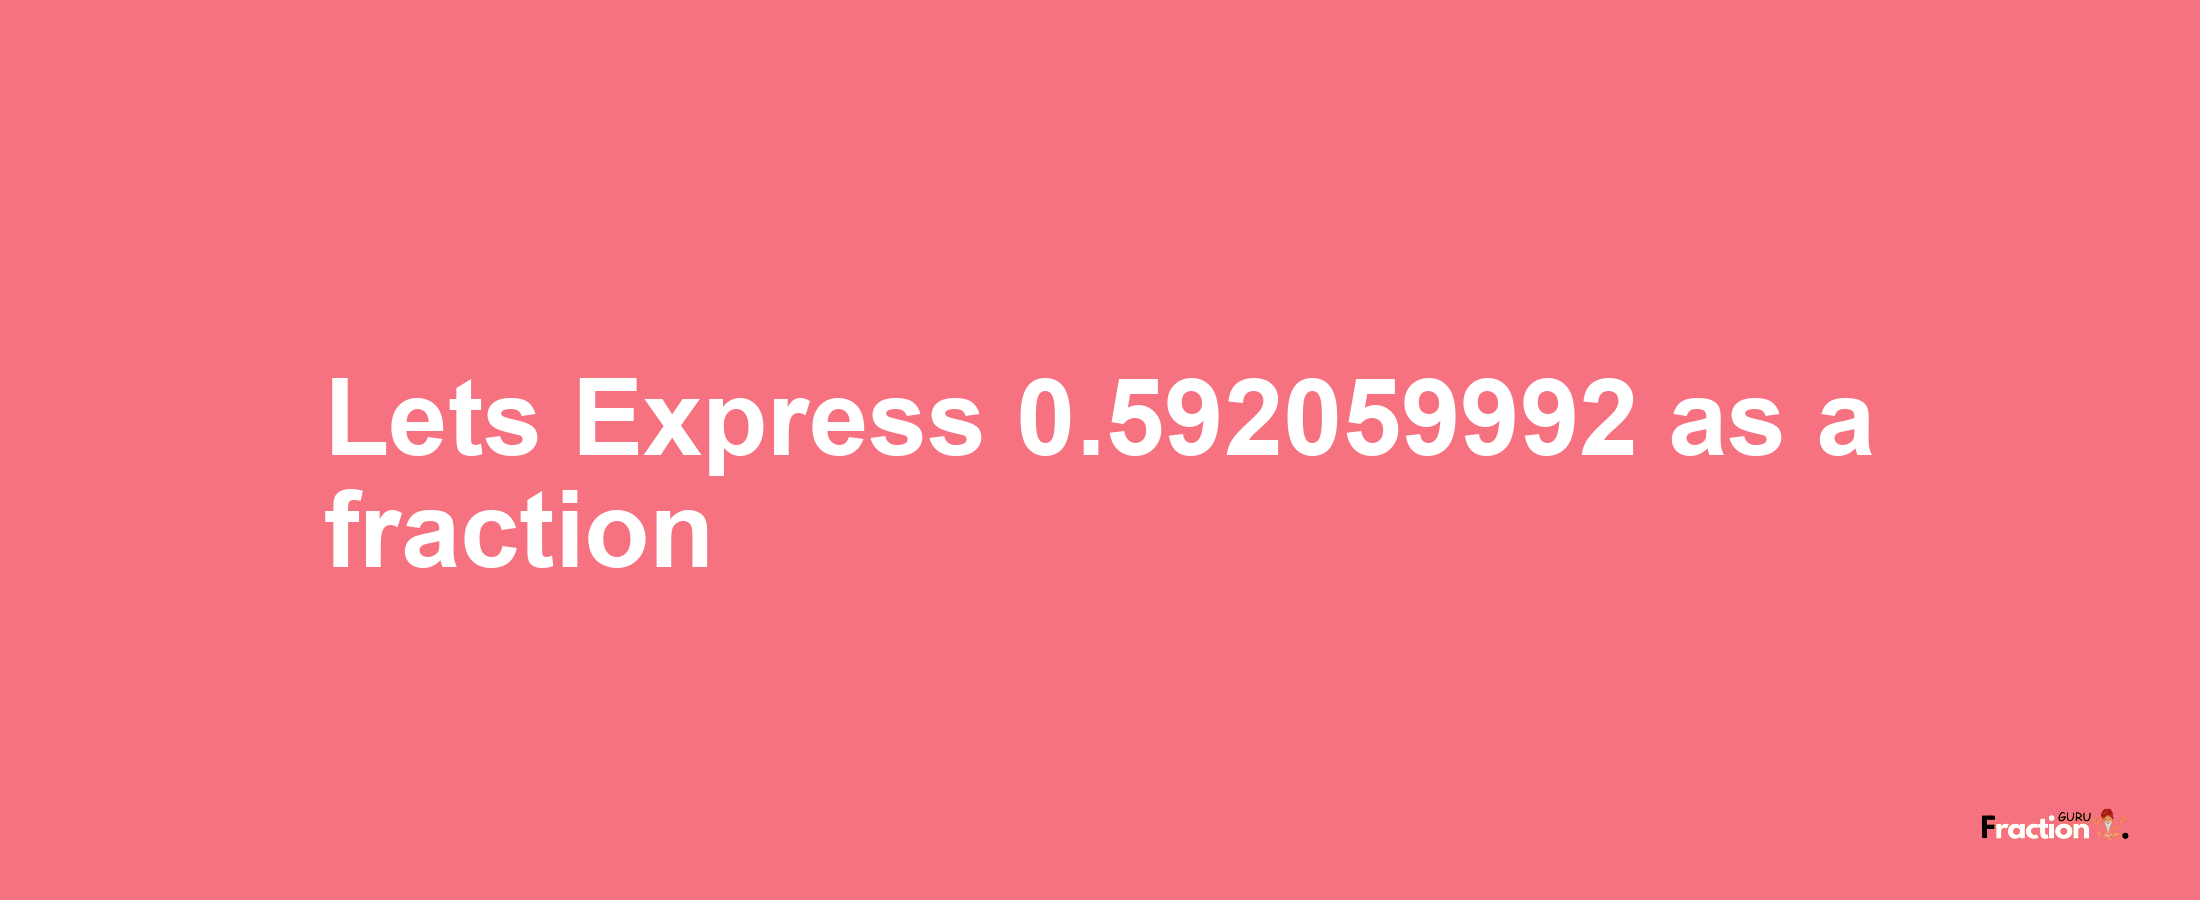 Lets Express 0.592059992 as afraction